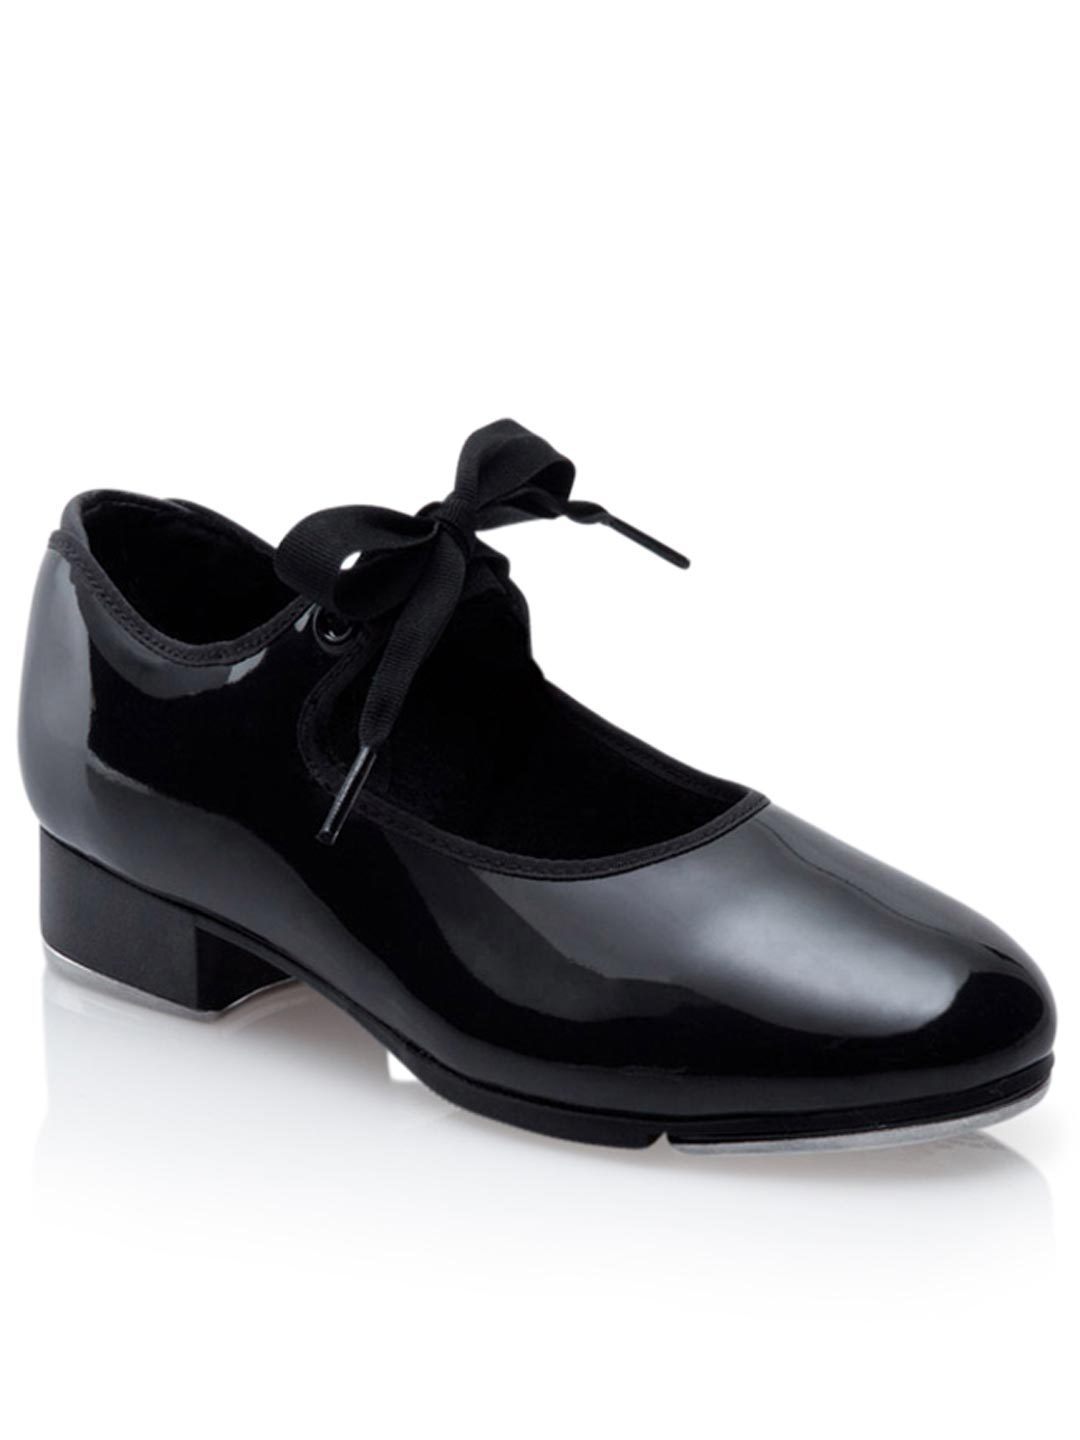 black patent leather tap shoes